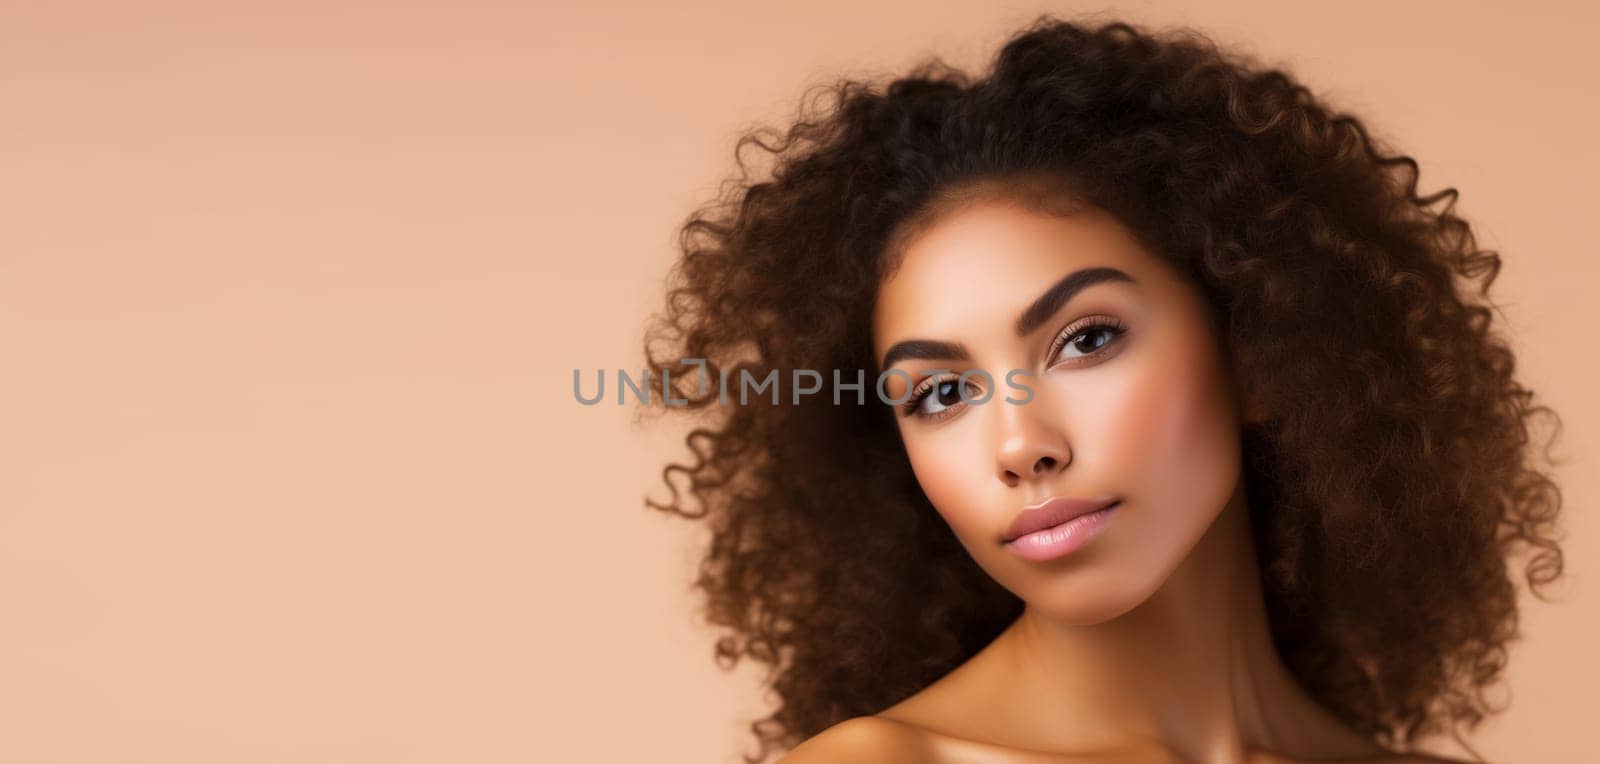 Beauty portrait of pretty young African woman with curly hair, beautiful lovely model posing on beige studio background